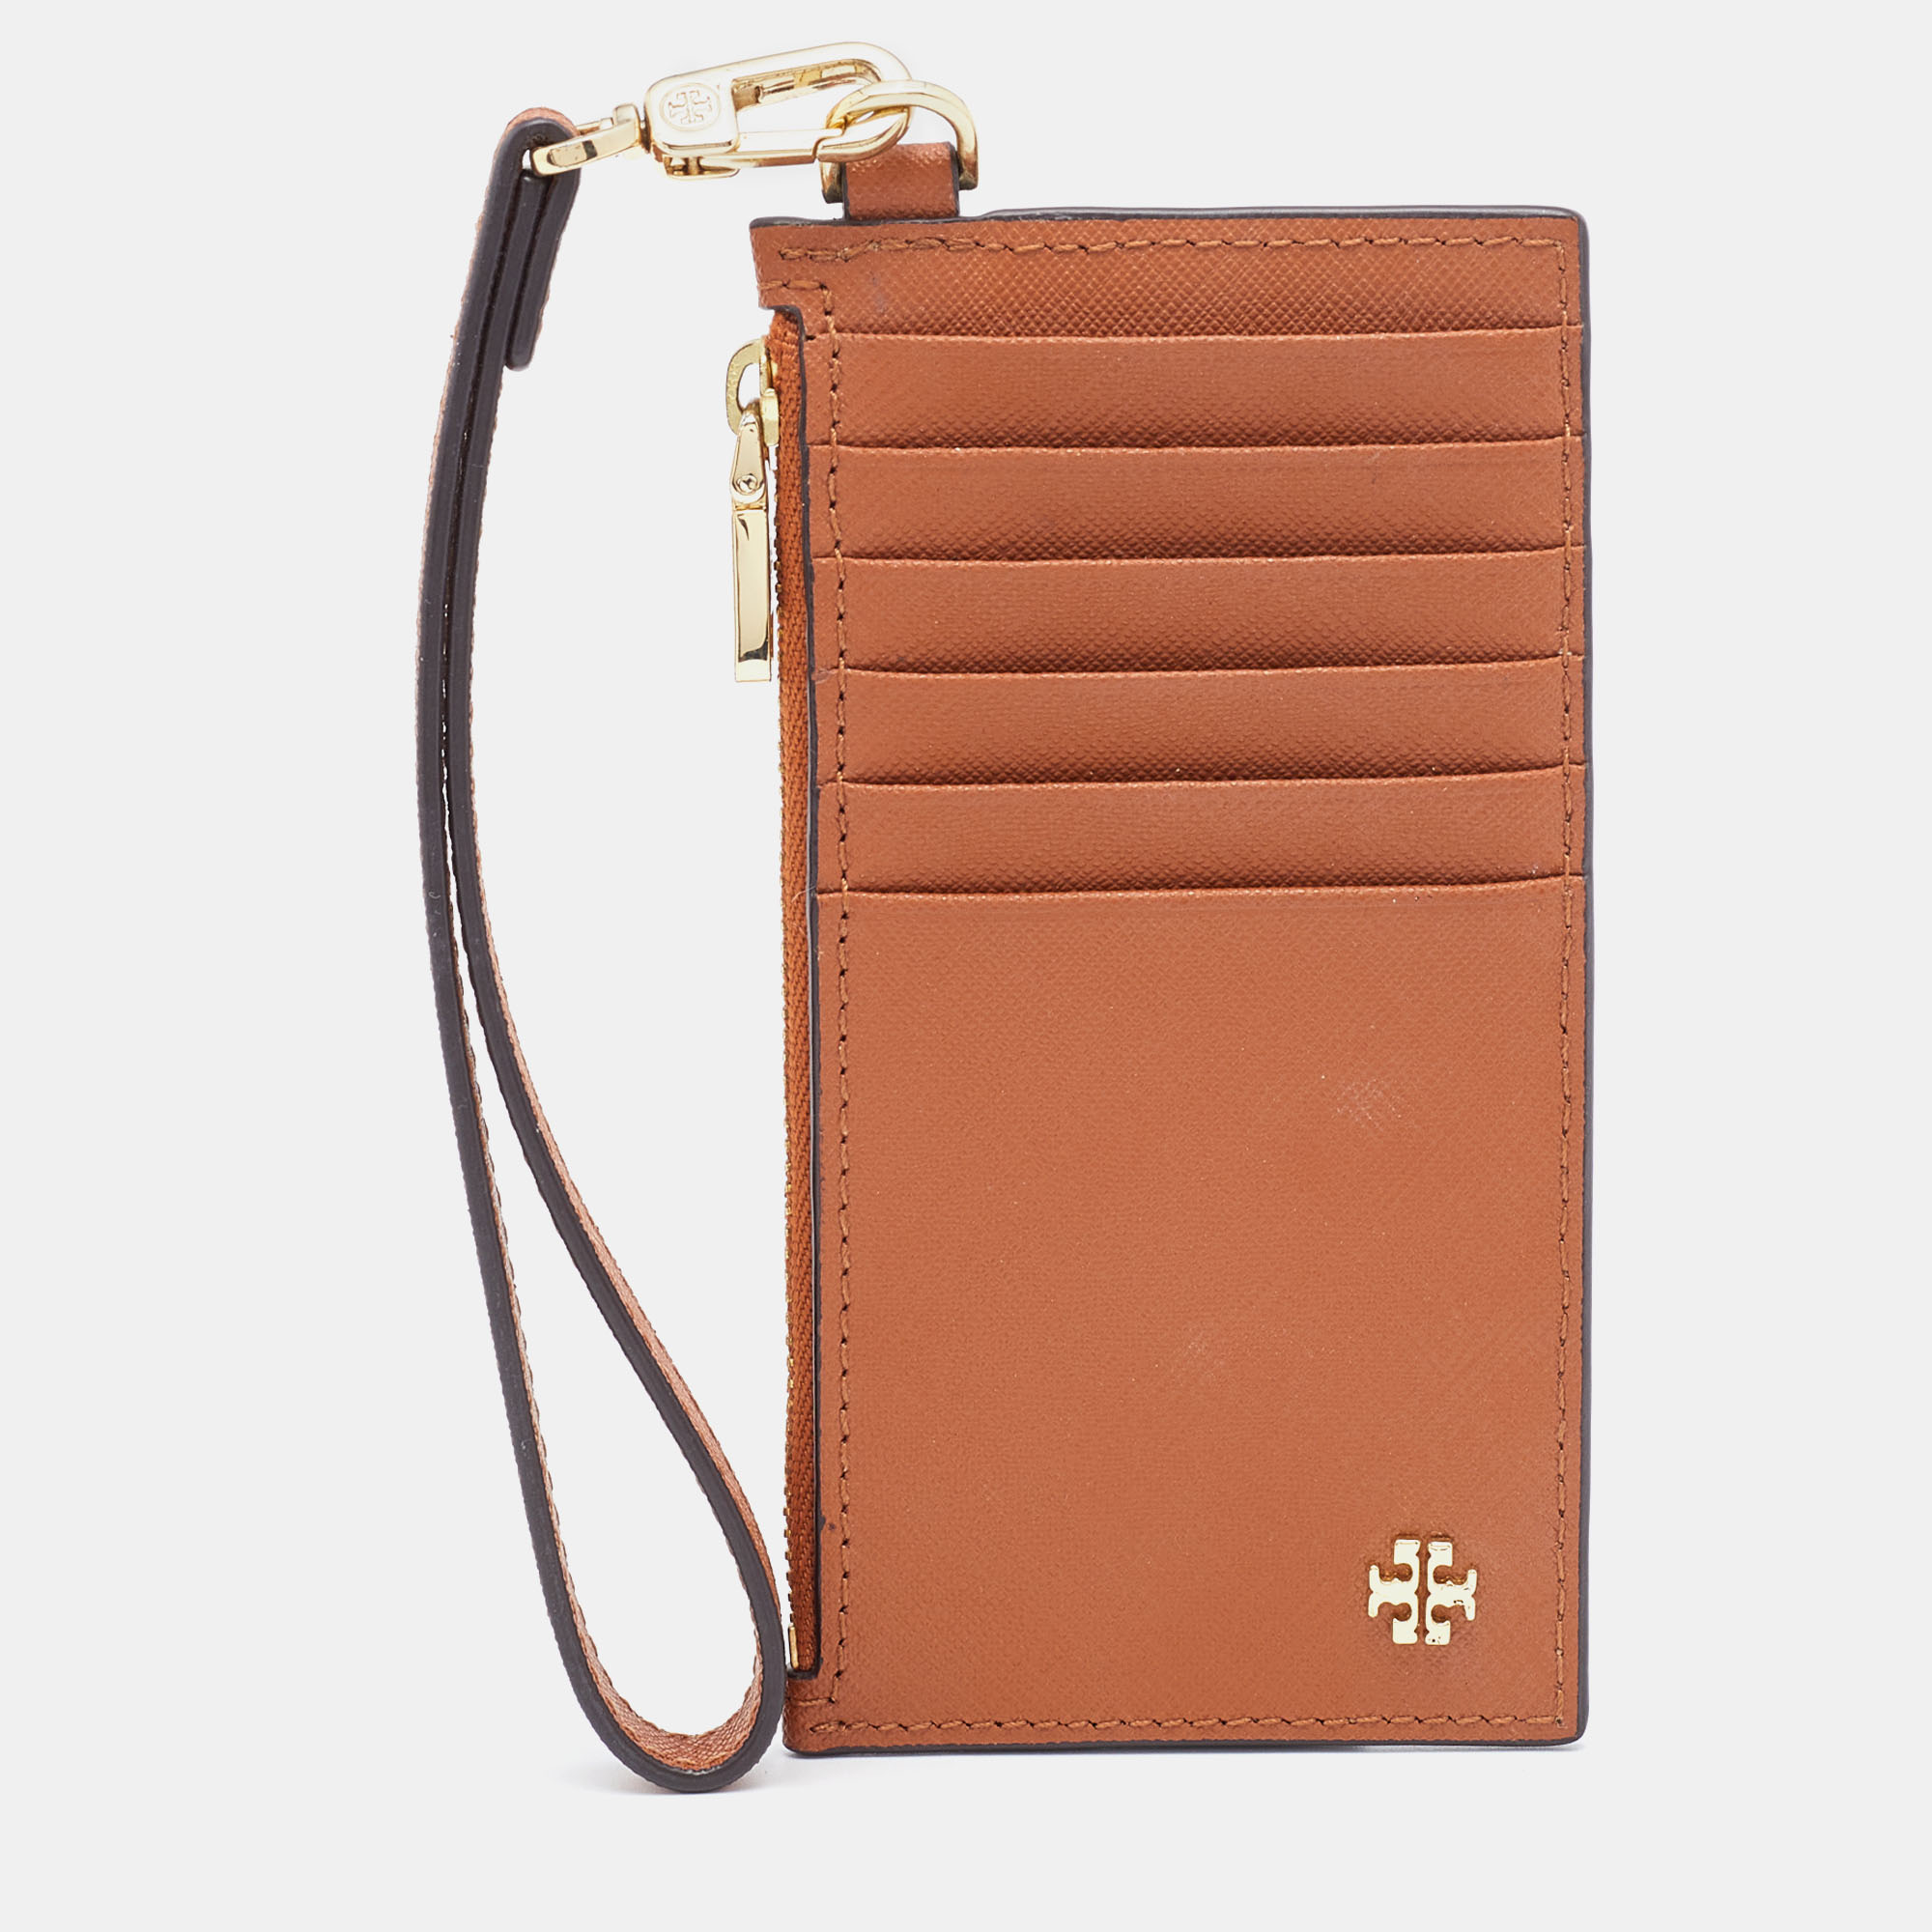 

Tory Burch Brown Saffiano Leather Miller Top Zip Card Case